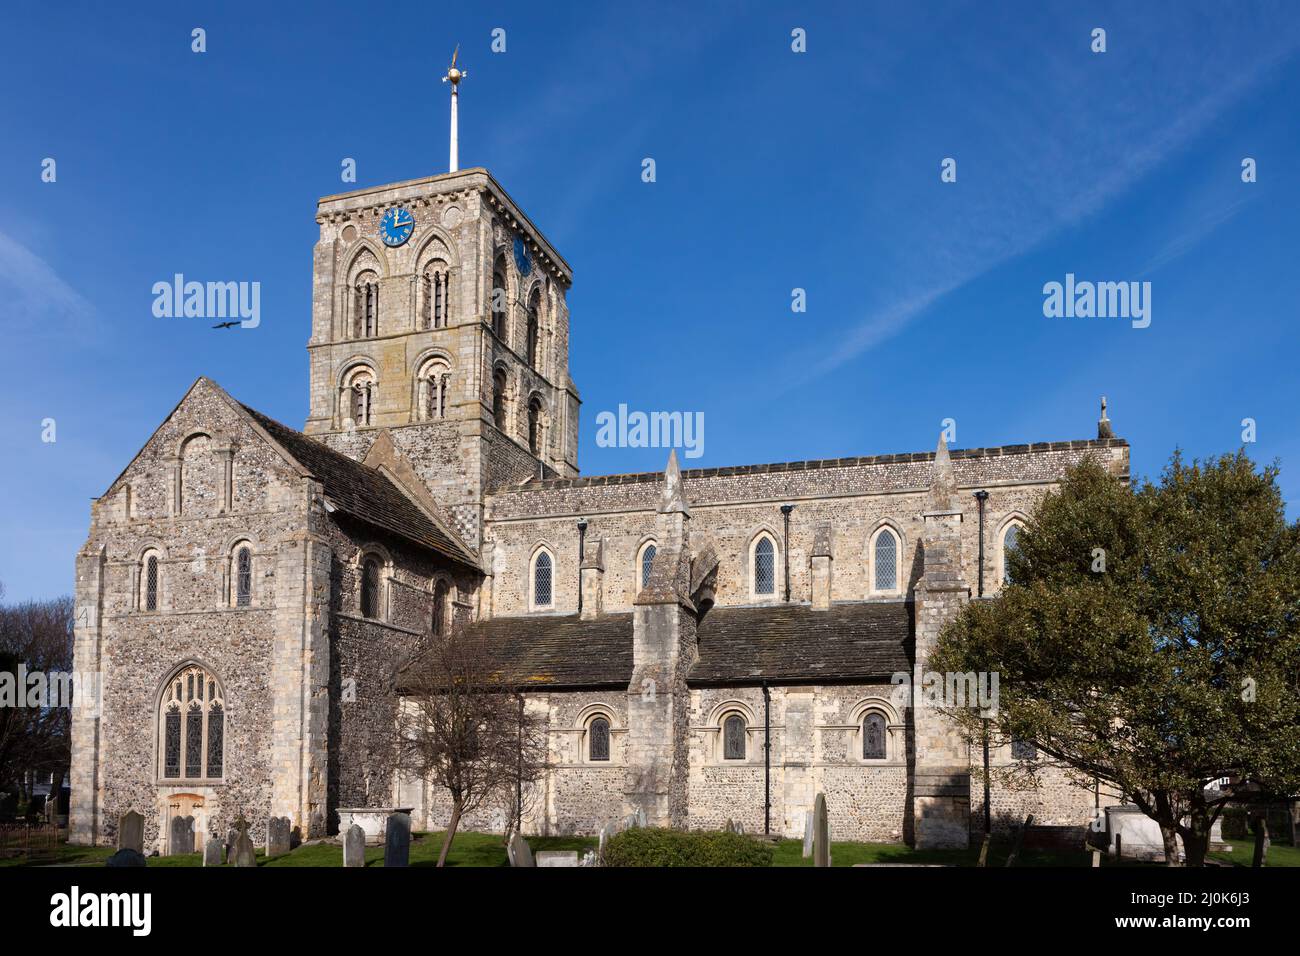 SHOREHAM-BY-SEA, WEST SUSSEX, UK - FEBRUARY 1 : View of Shoreham church in Shoreham-by-Sea, West Sussex on February 1, 2010 Stock Photo